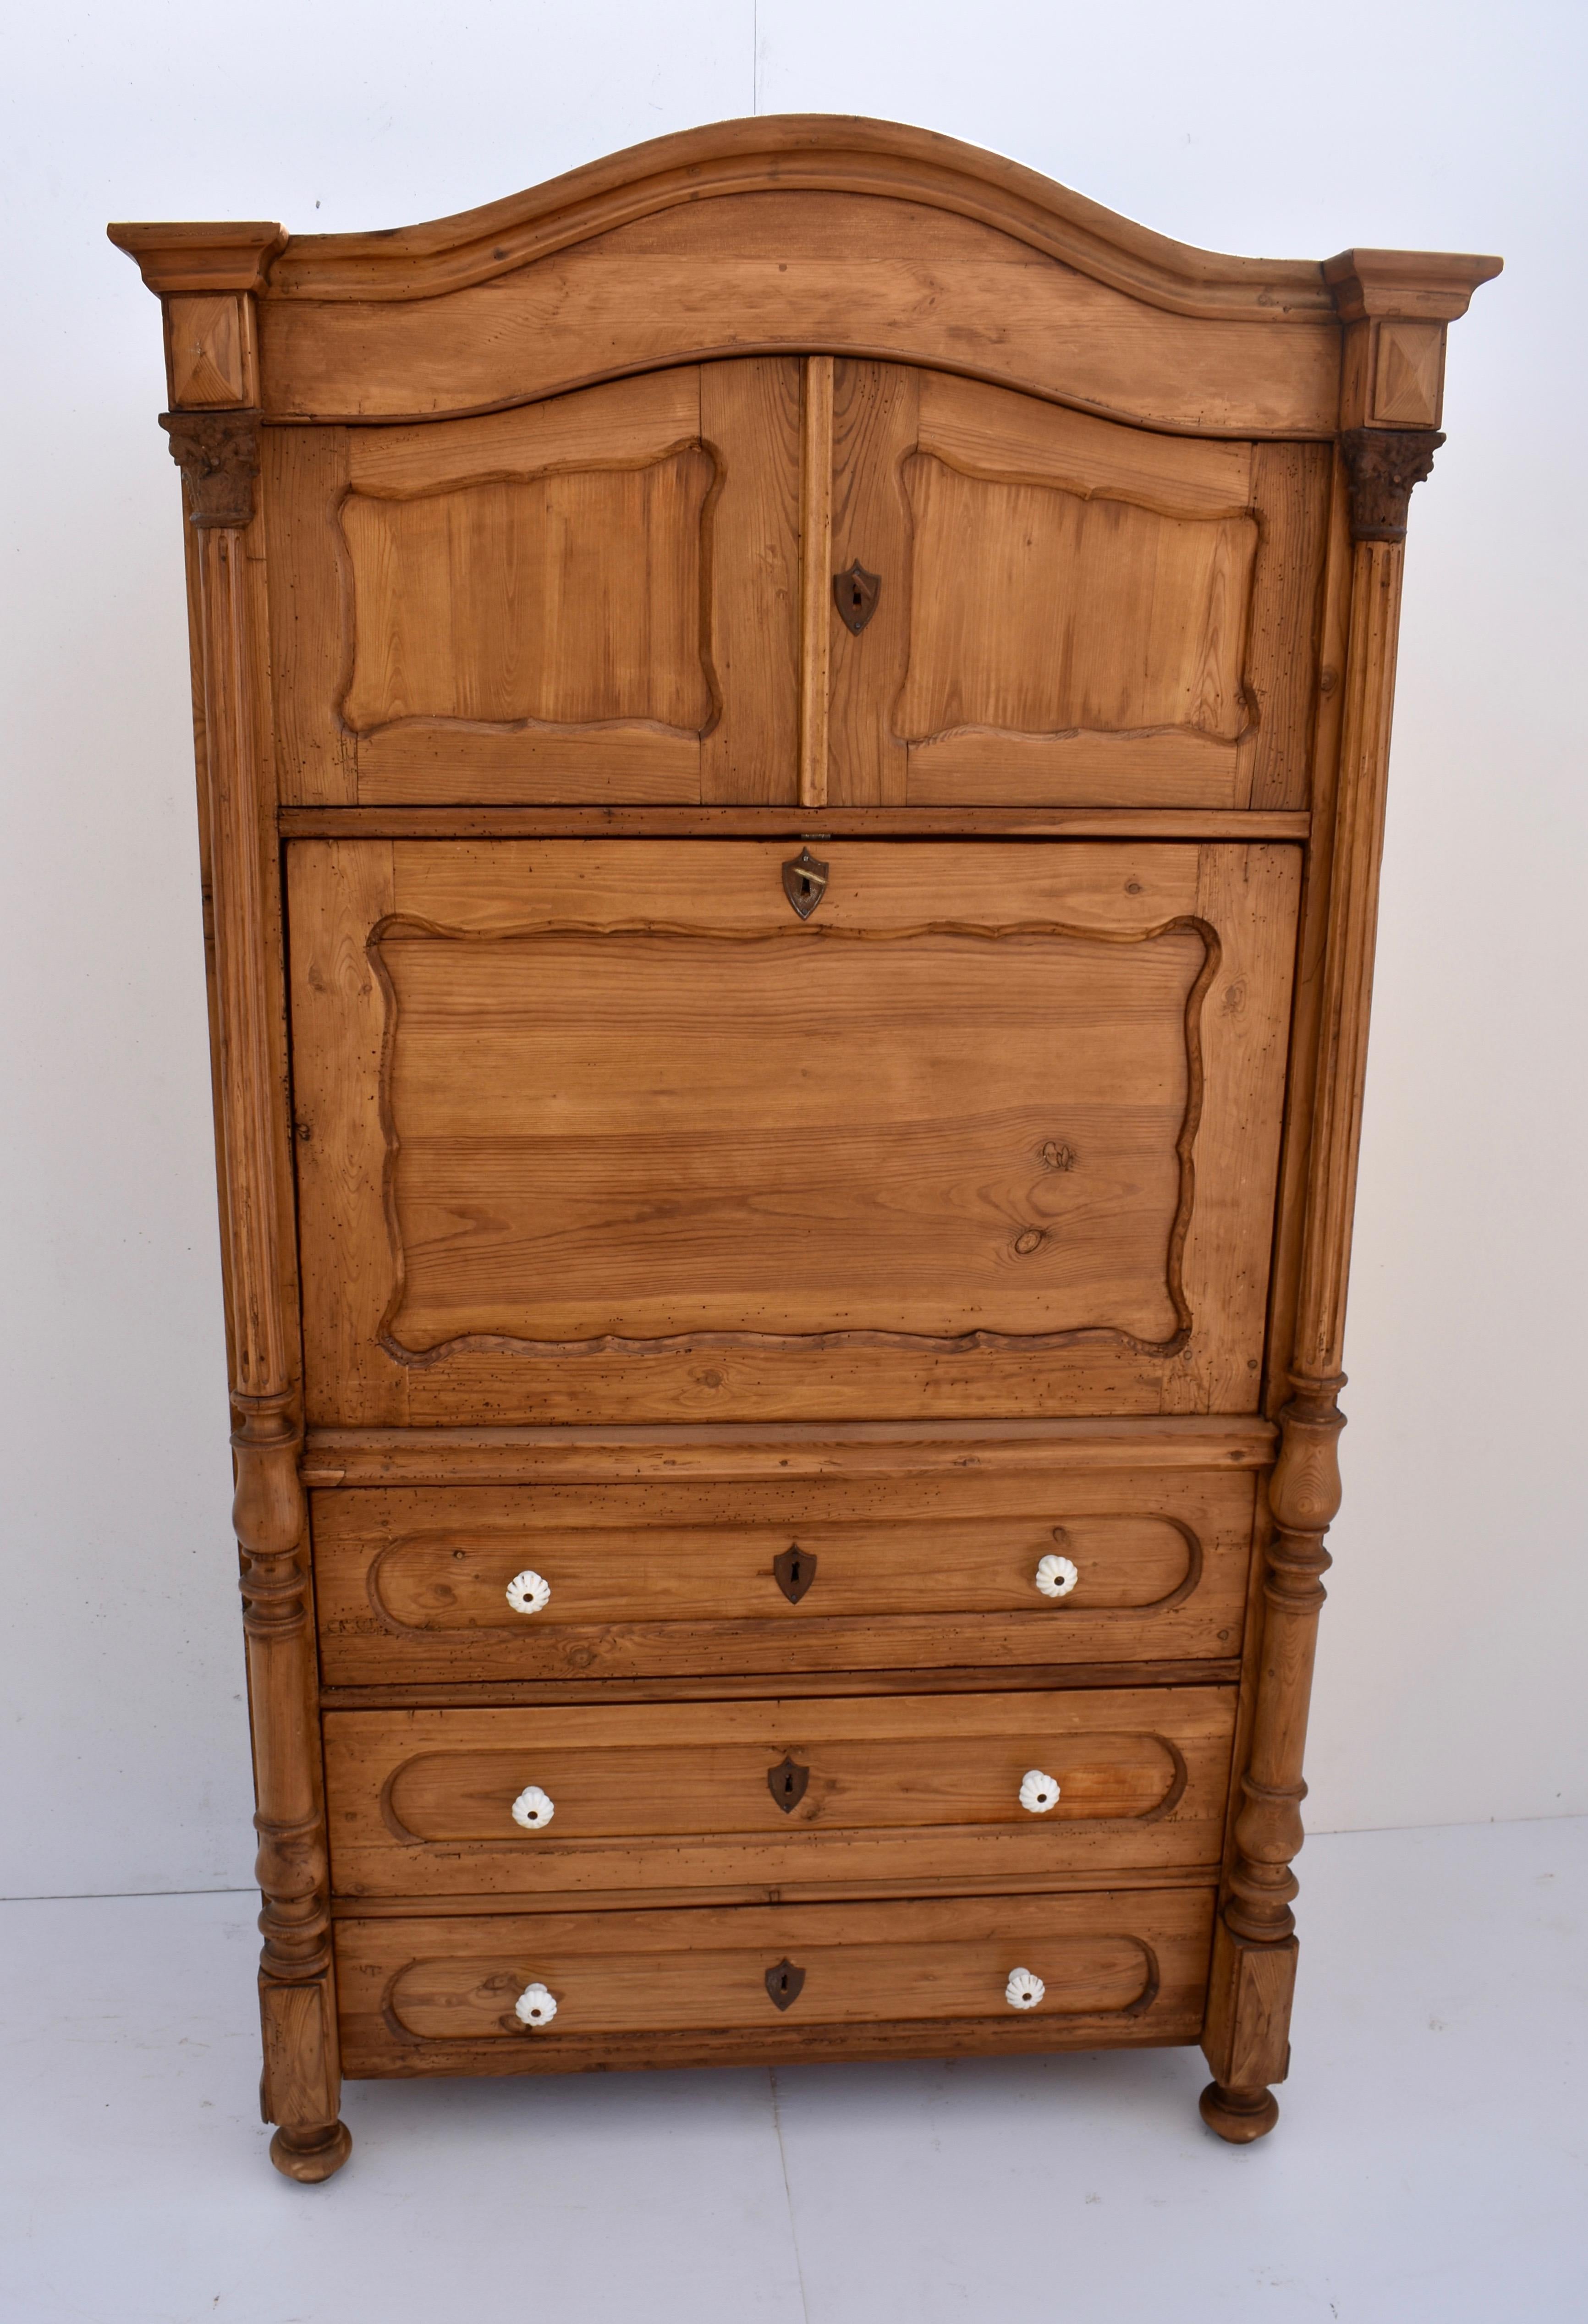 This is an outstanding Dutch pine secretaire a abatant from the late nineteenth century. Hardwood crown molding and a deep fascia sit above two arched paneled doors enclosing a deep storage cupboard The desk top opens to a mahogany-veneered interior